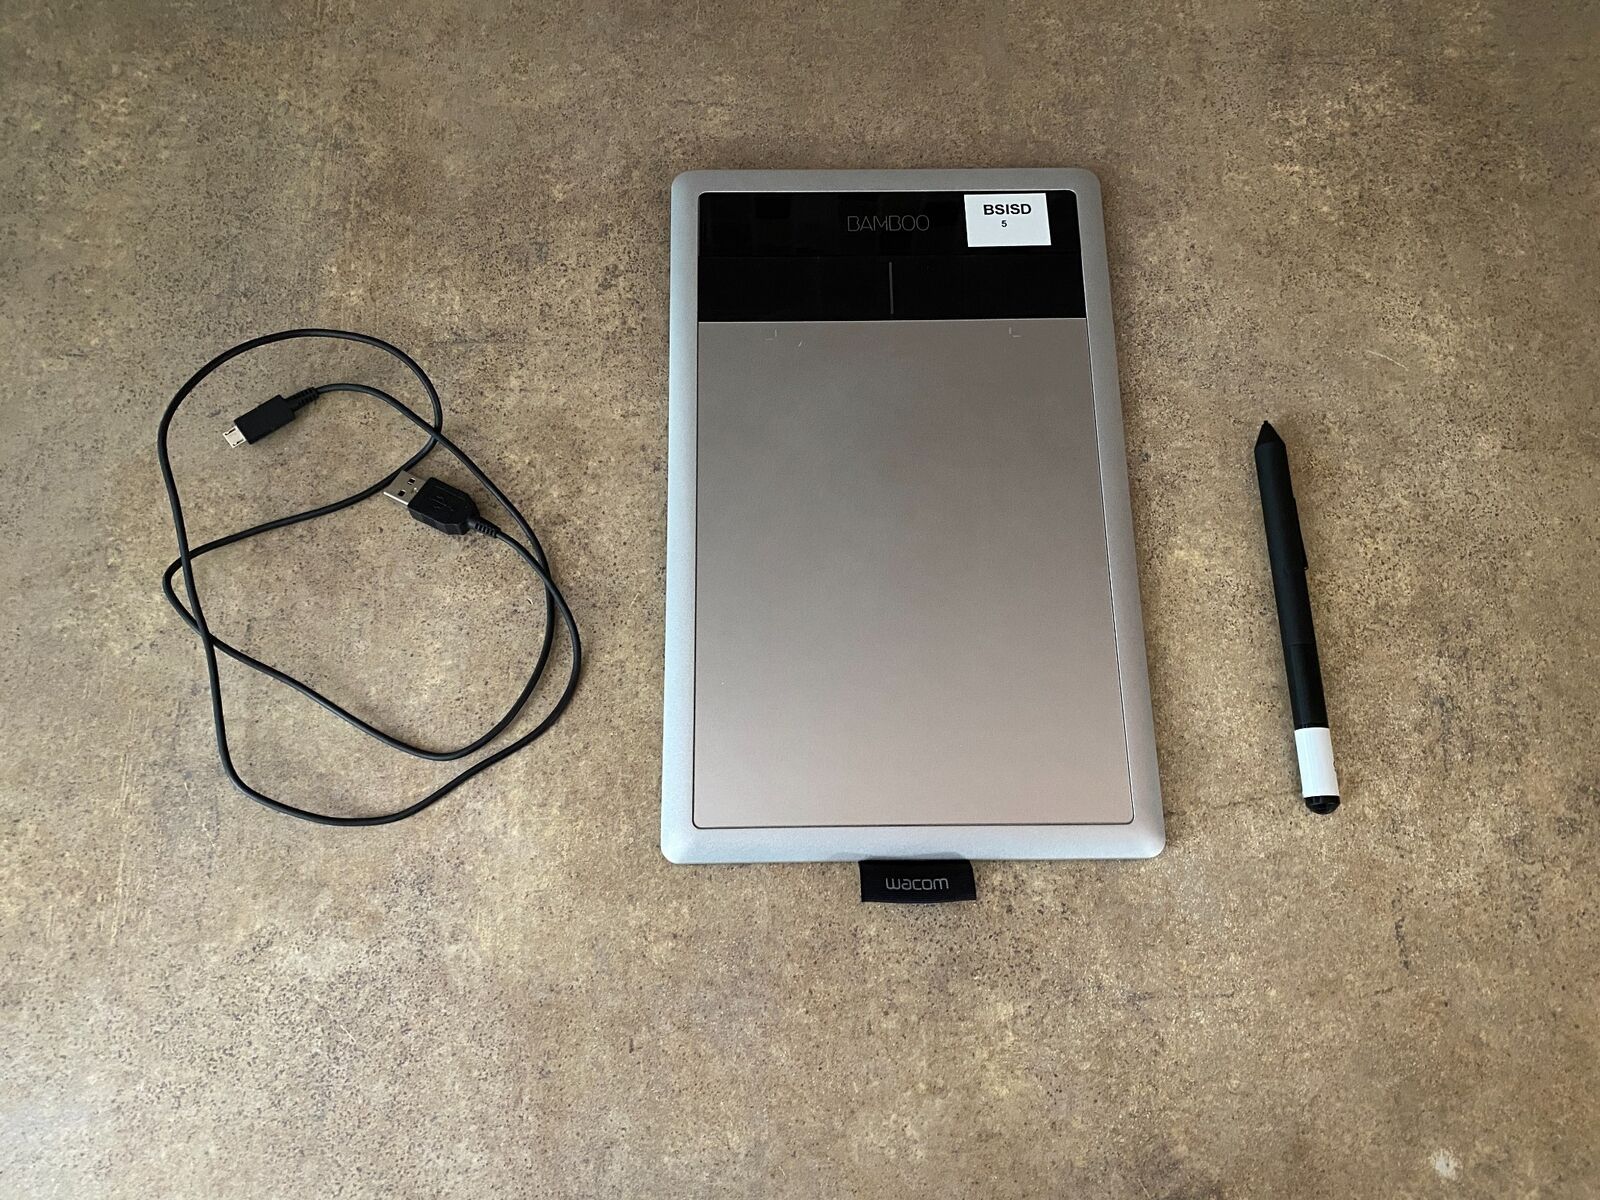 WACOM CTH470 BAMBOO CAPTURE PEN AND TOUCH TABLET URUT-36